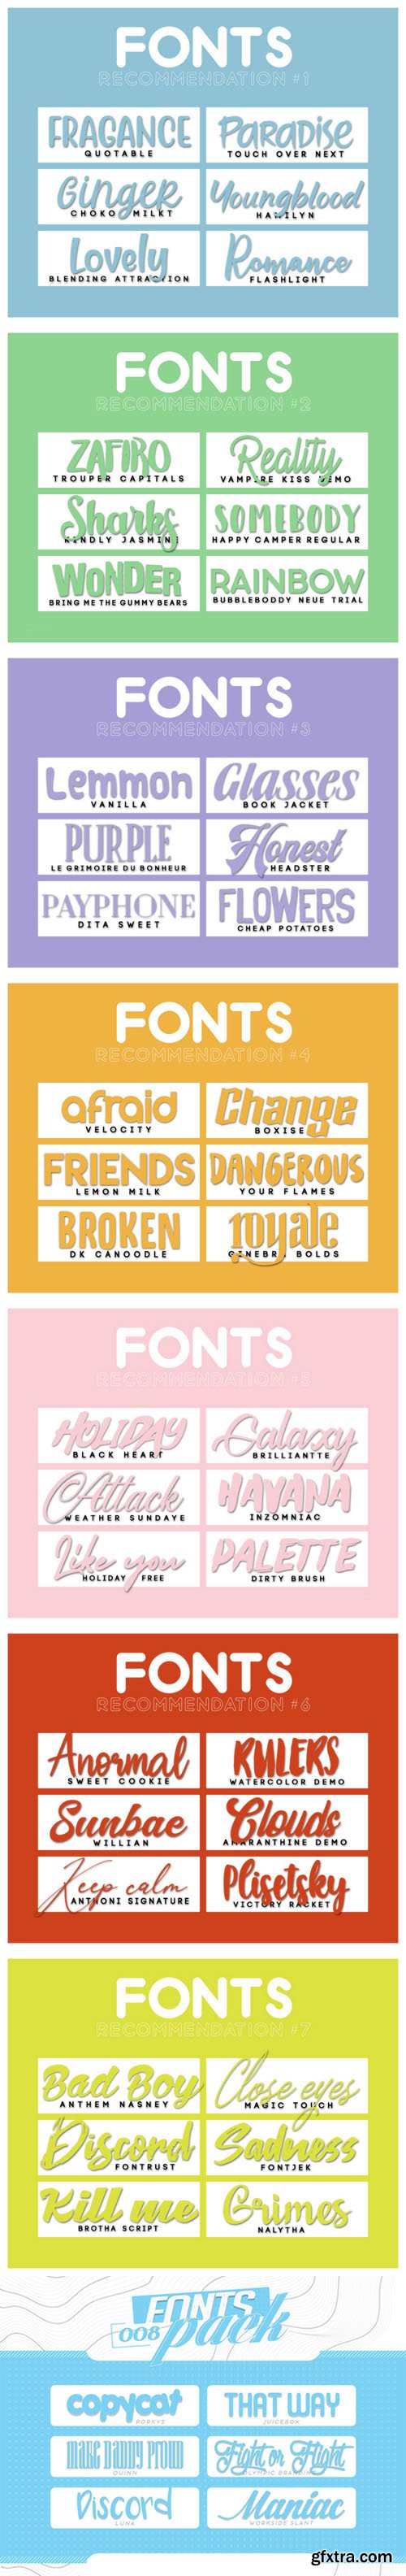 48 Awesome Fonts Collection